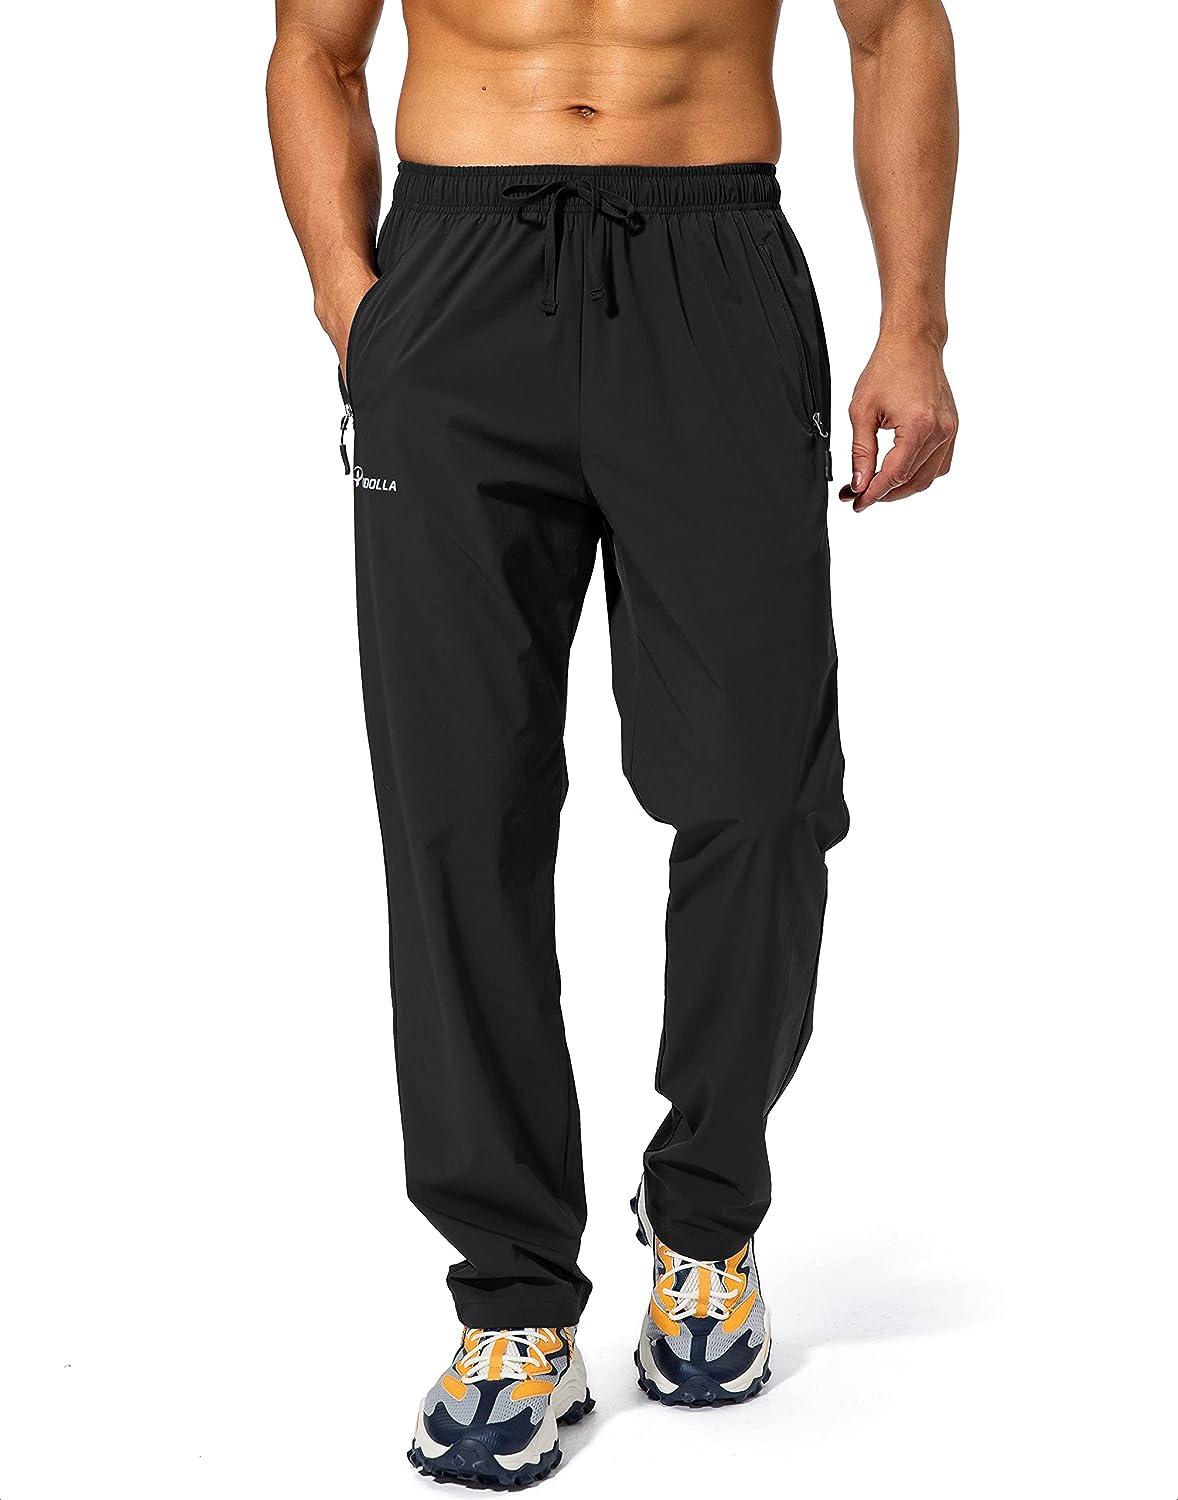 Hfyihgf Men's Athletic Joggers Pants Lightweight Drawstring Waist Tapered  Cargo Pant Workout Walking Trousers with Zipper Pockets(Black,L)